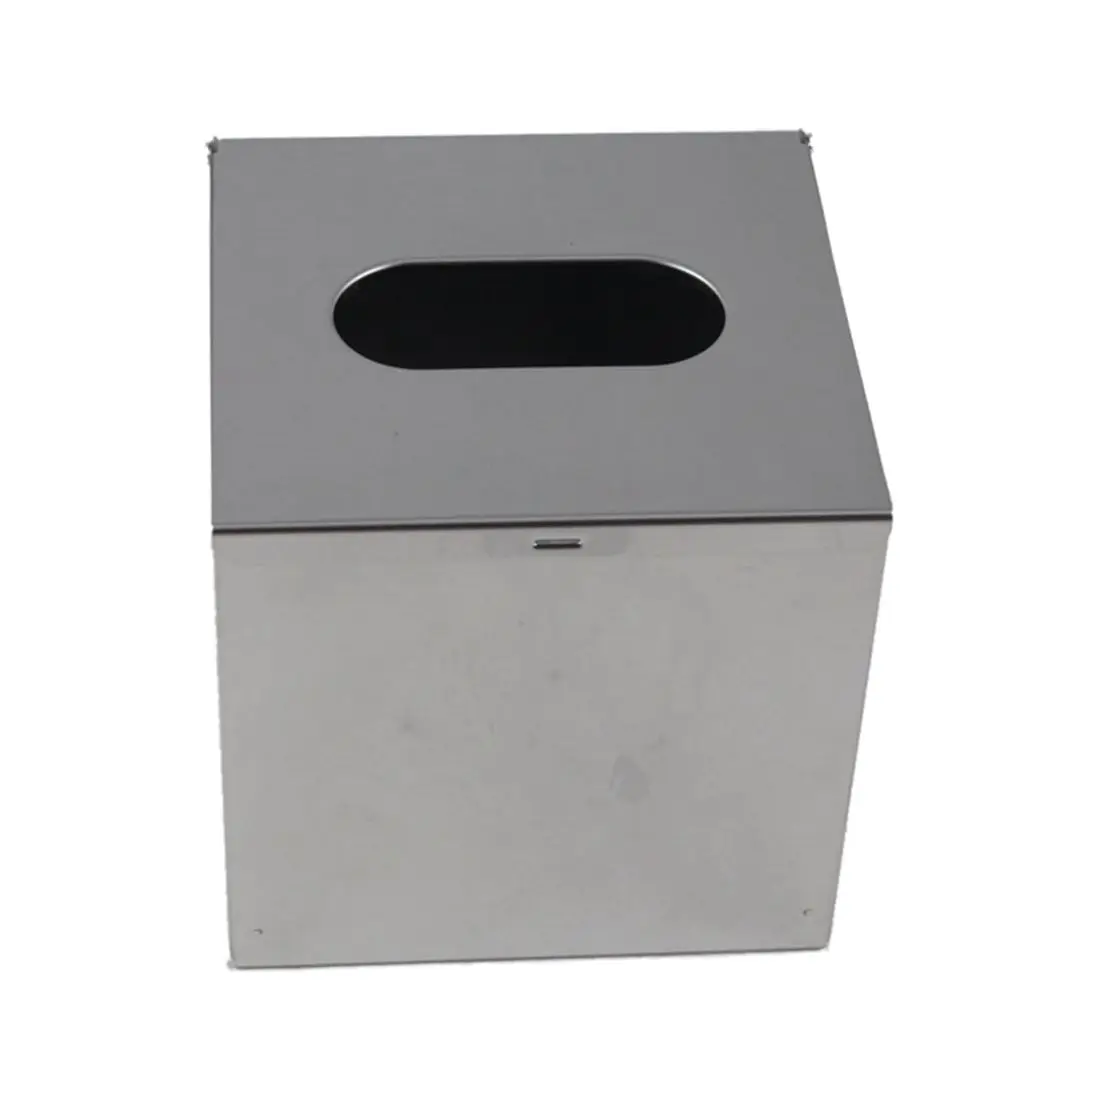  Stainless Steel Handkerchief Dispenser Cosmetic Towel Tissue box - Silver